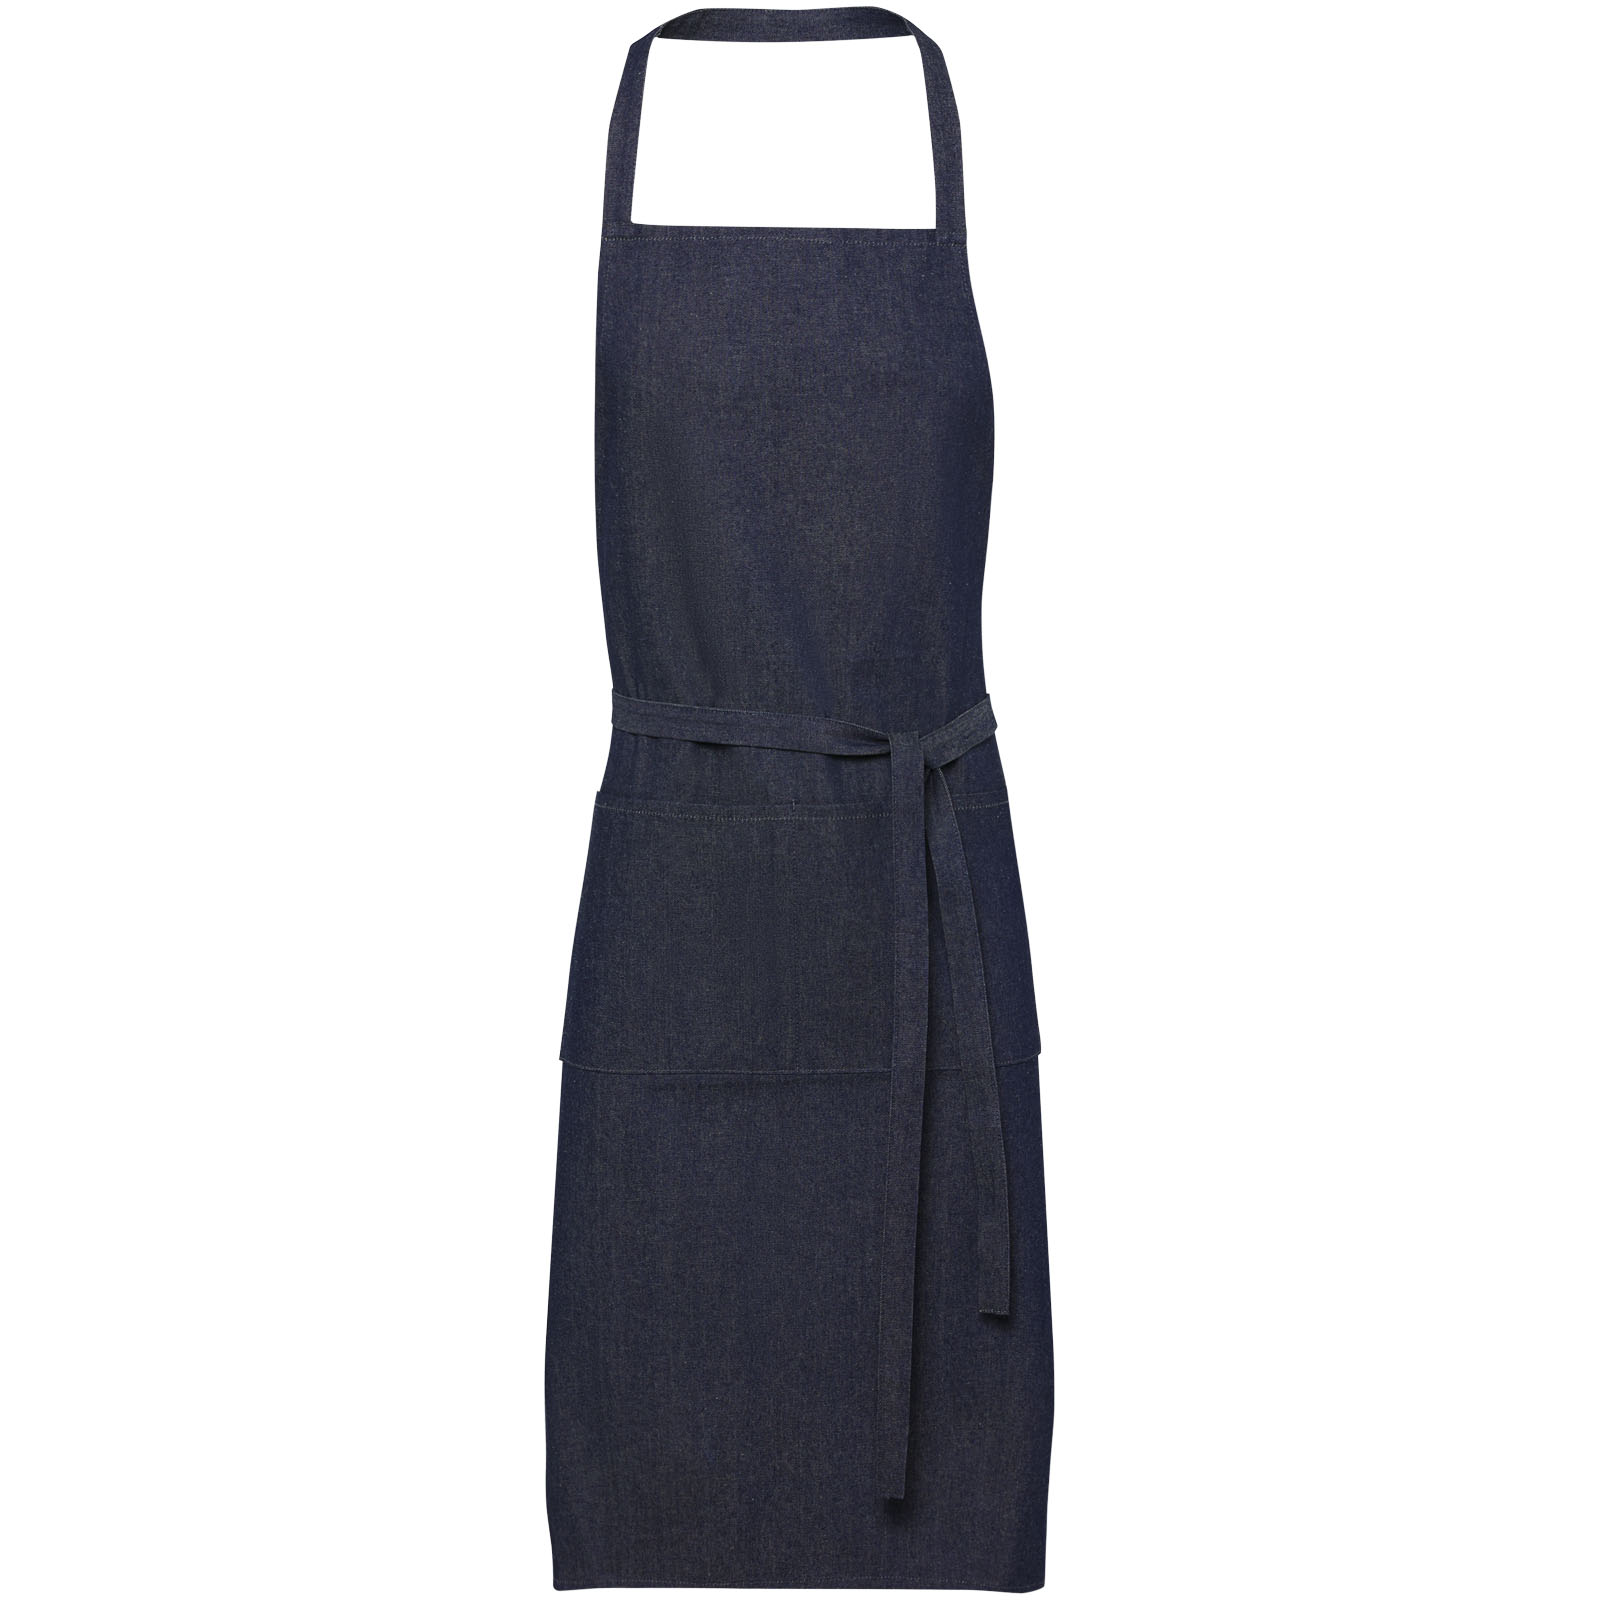 Advertising Aprons - Jeen 200 g/m² recycled denim apron